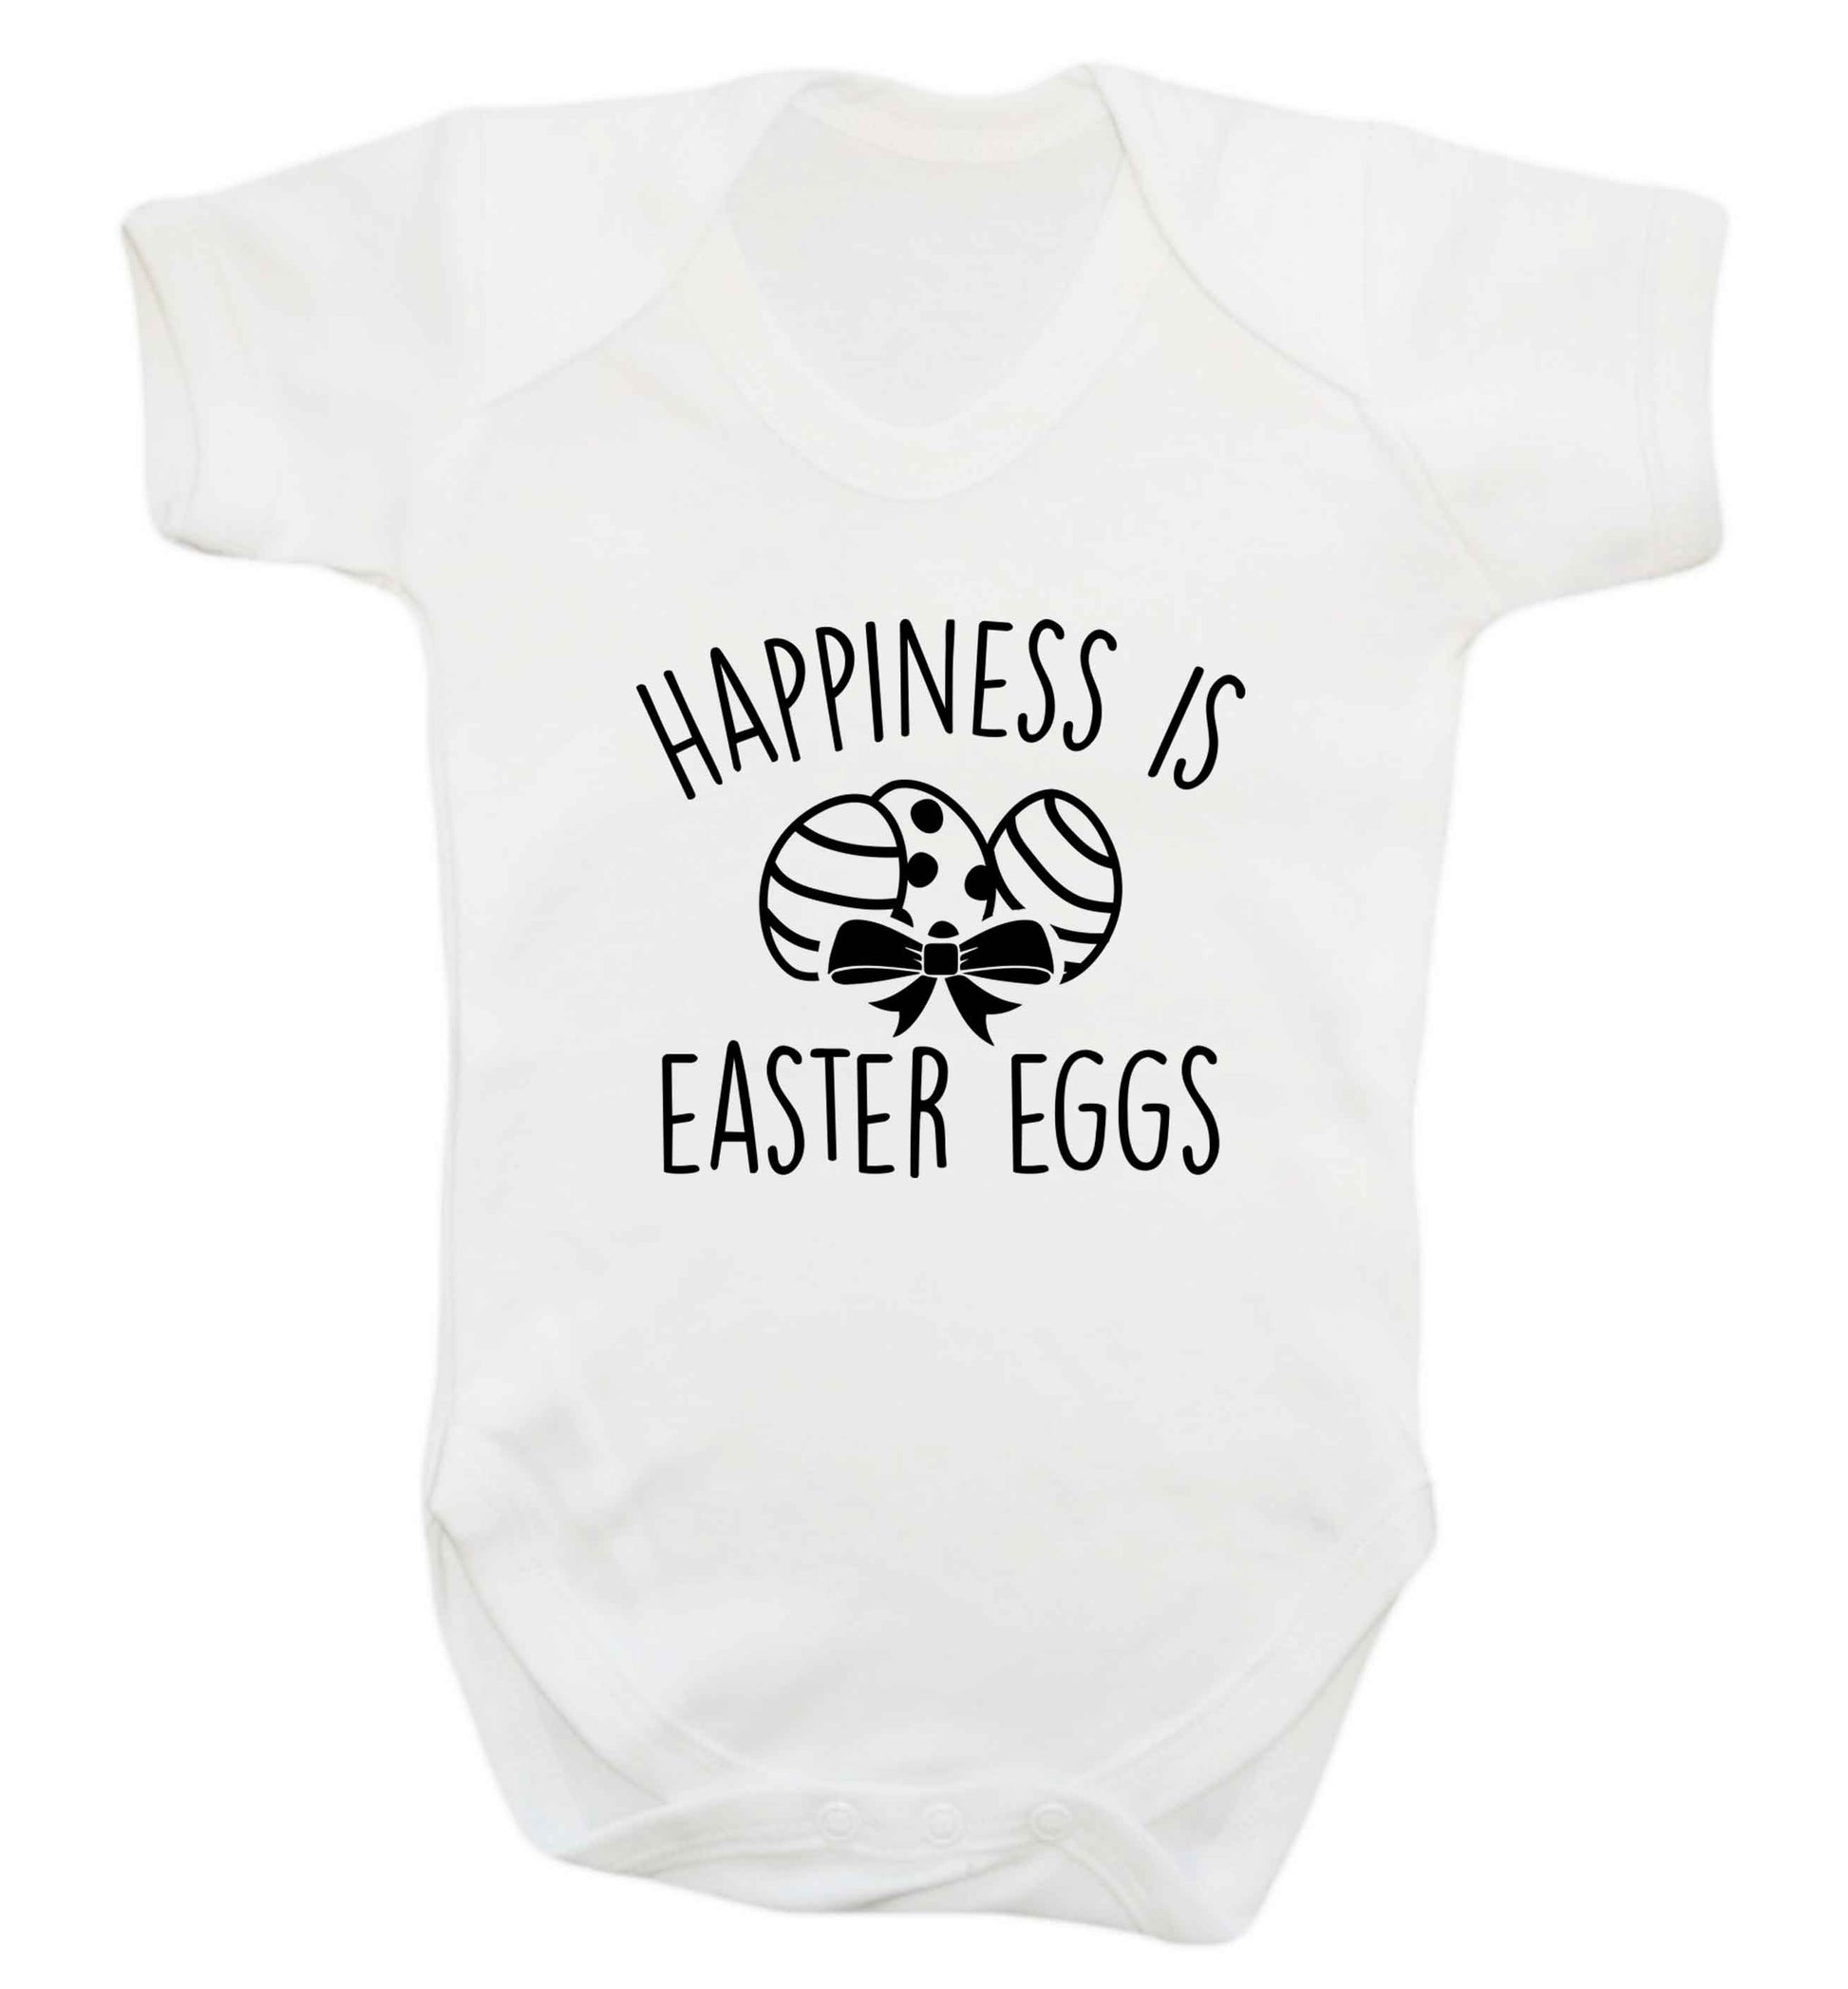 Happiness is Easter eggs baby vest white 18-24 months